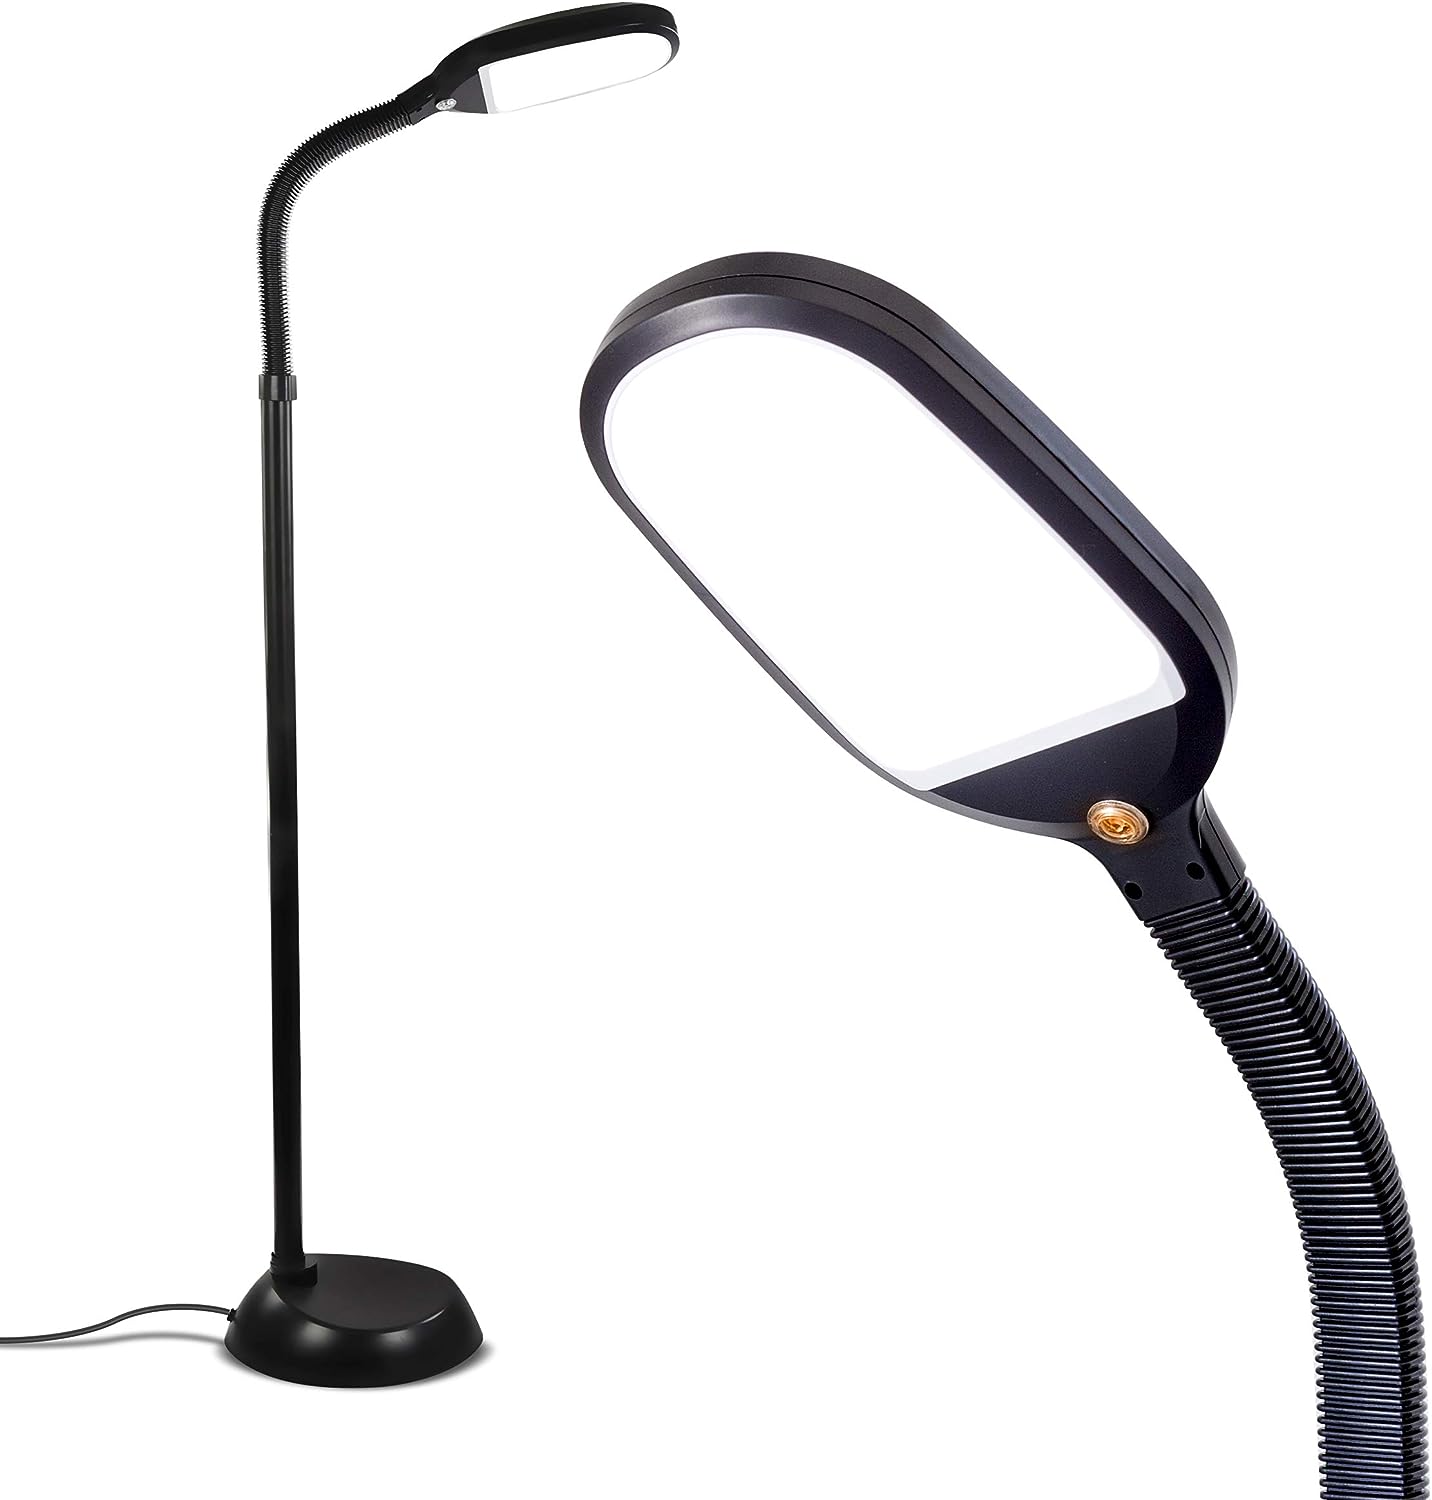 Brightech Litespan - Bright LED Floor Lamp for Crafts [...]